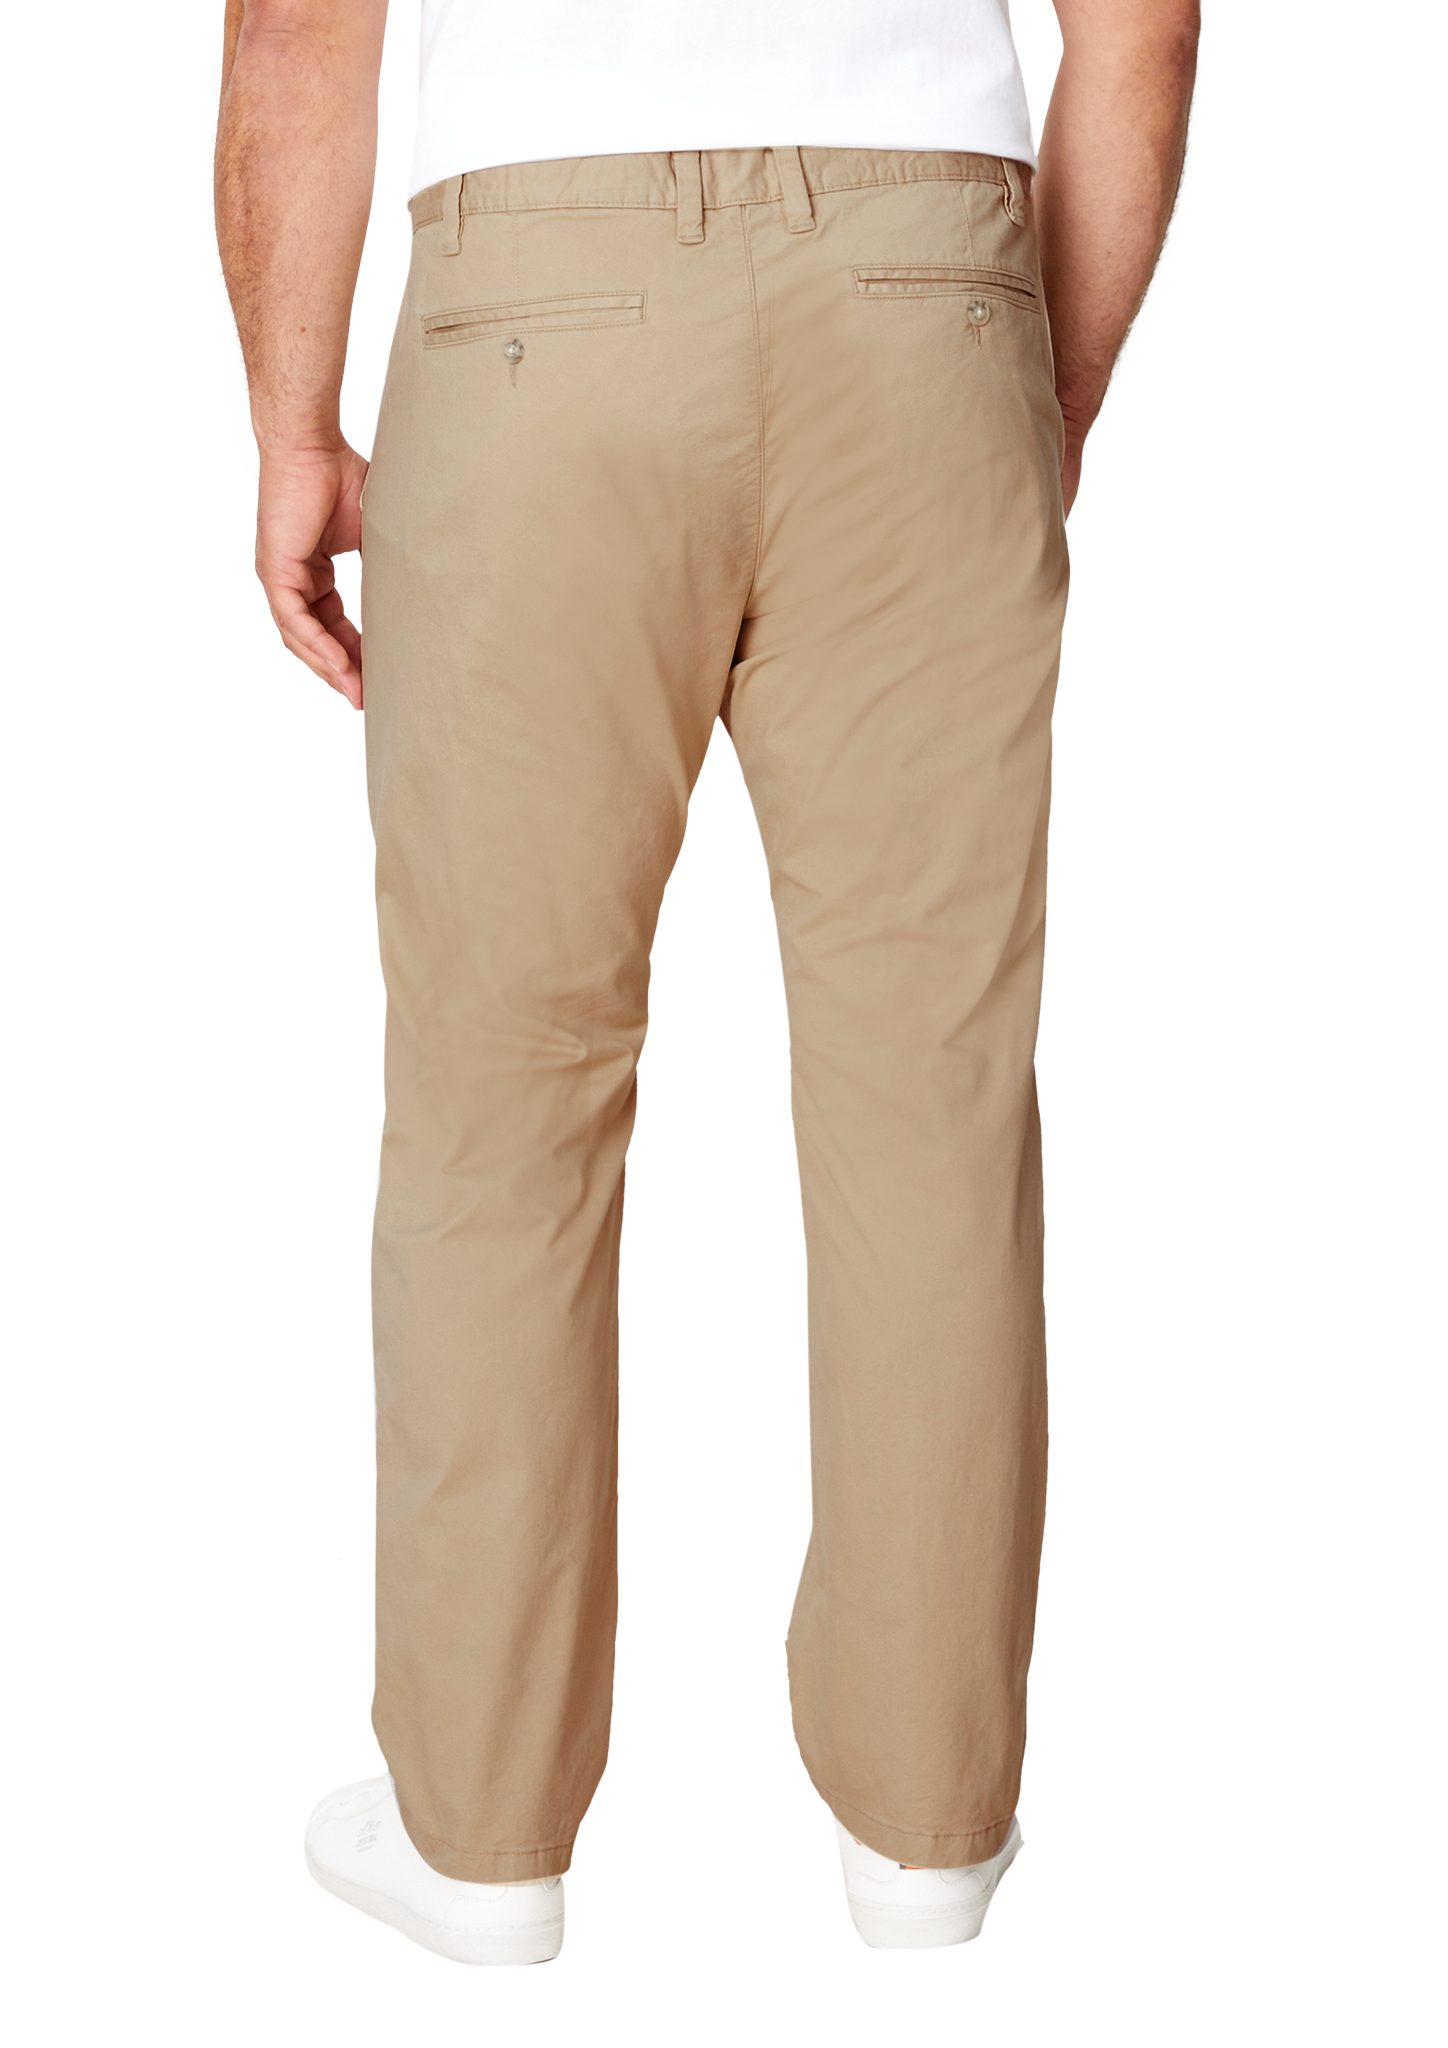 aus Stoffhose Relaxed: Baumwolltwill Chino s.Oliver beige